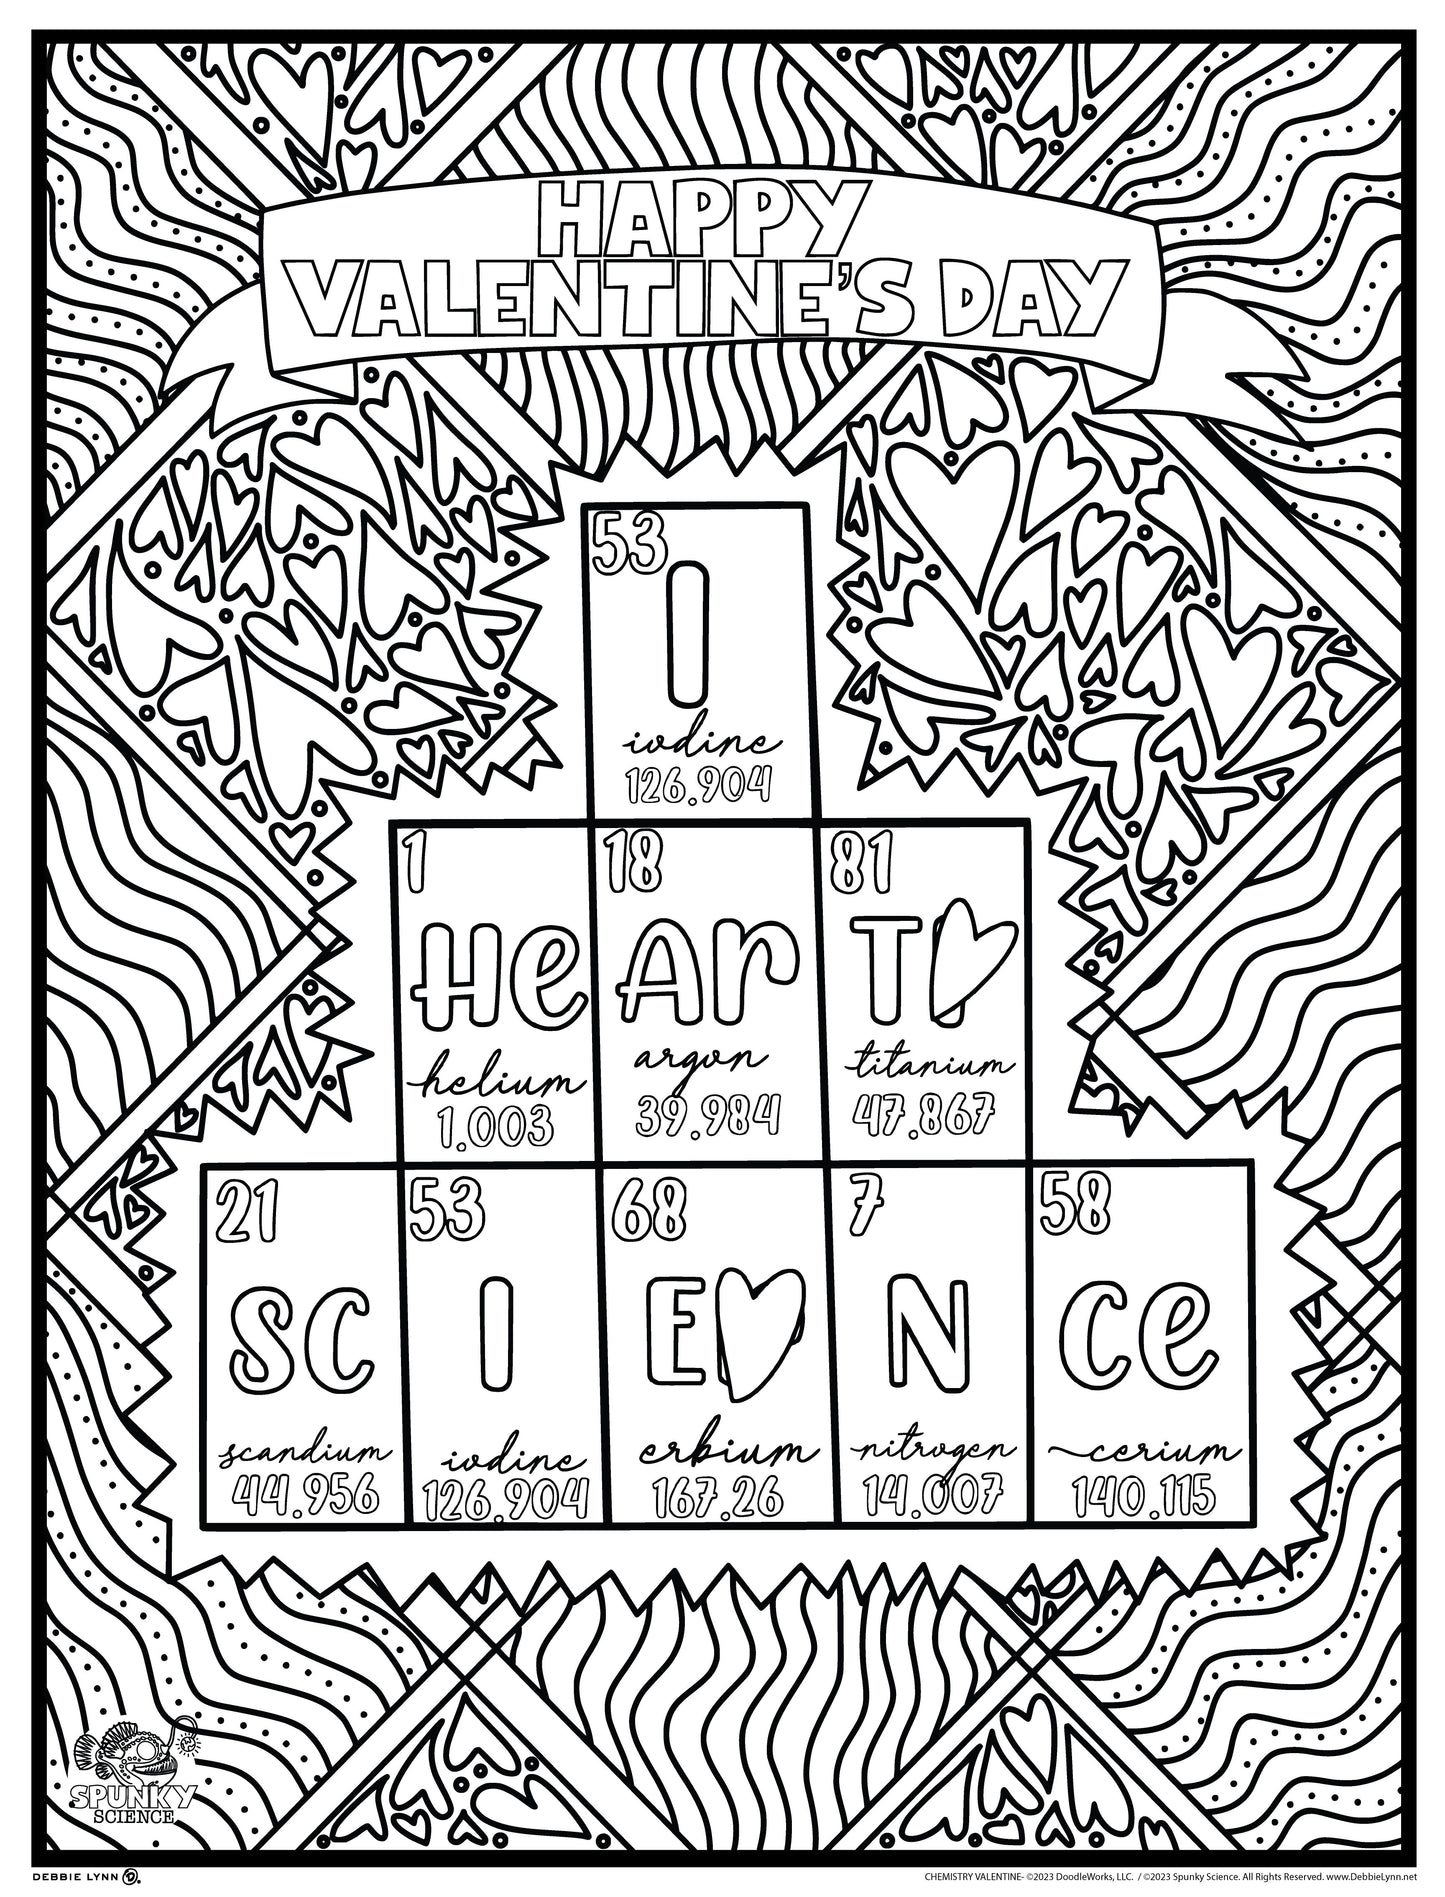 Chemistry Valentine Spunky Science Personalized Giant Coloring Poster 46"x60"